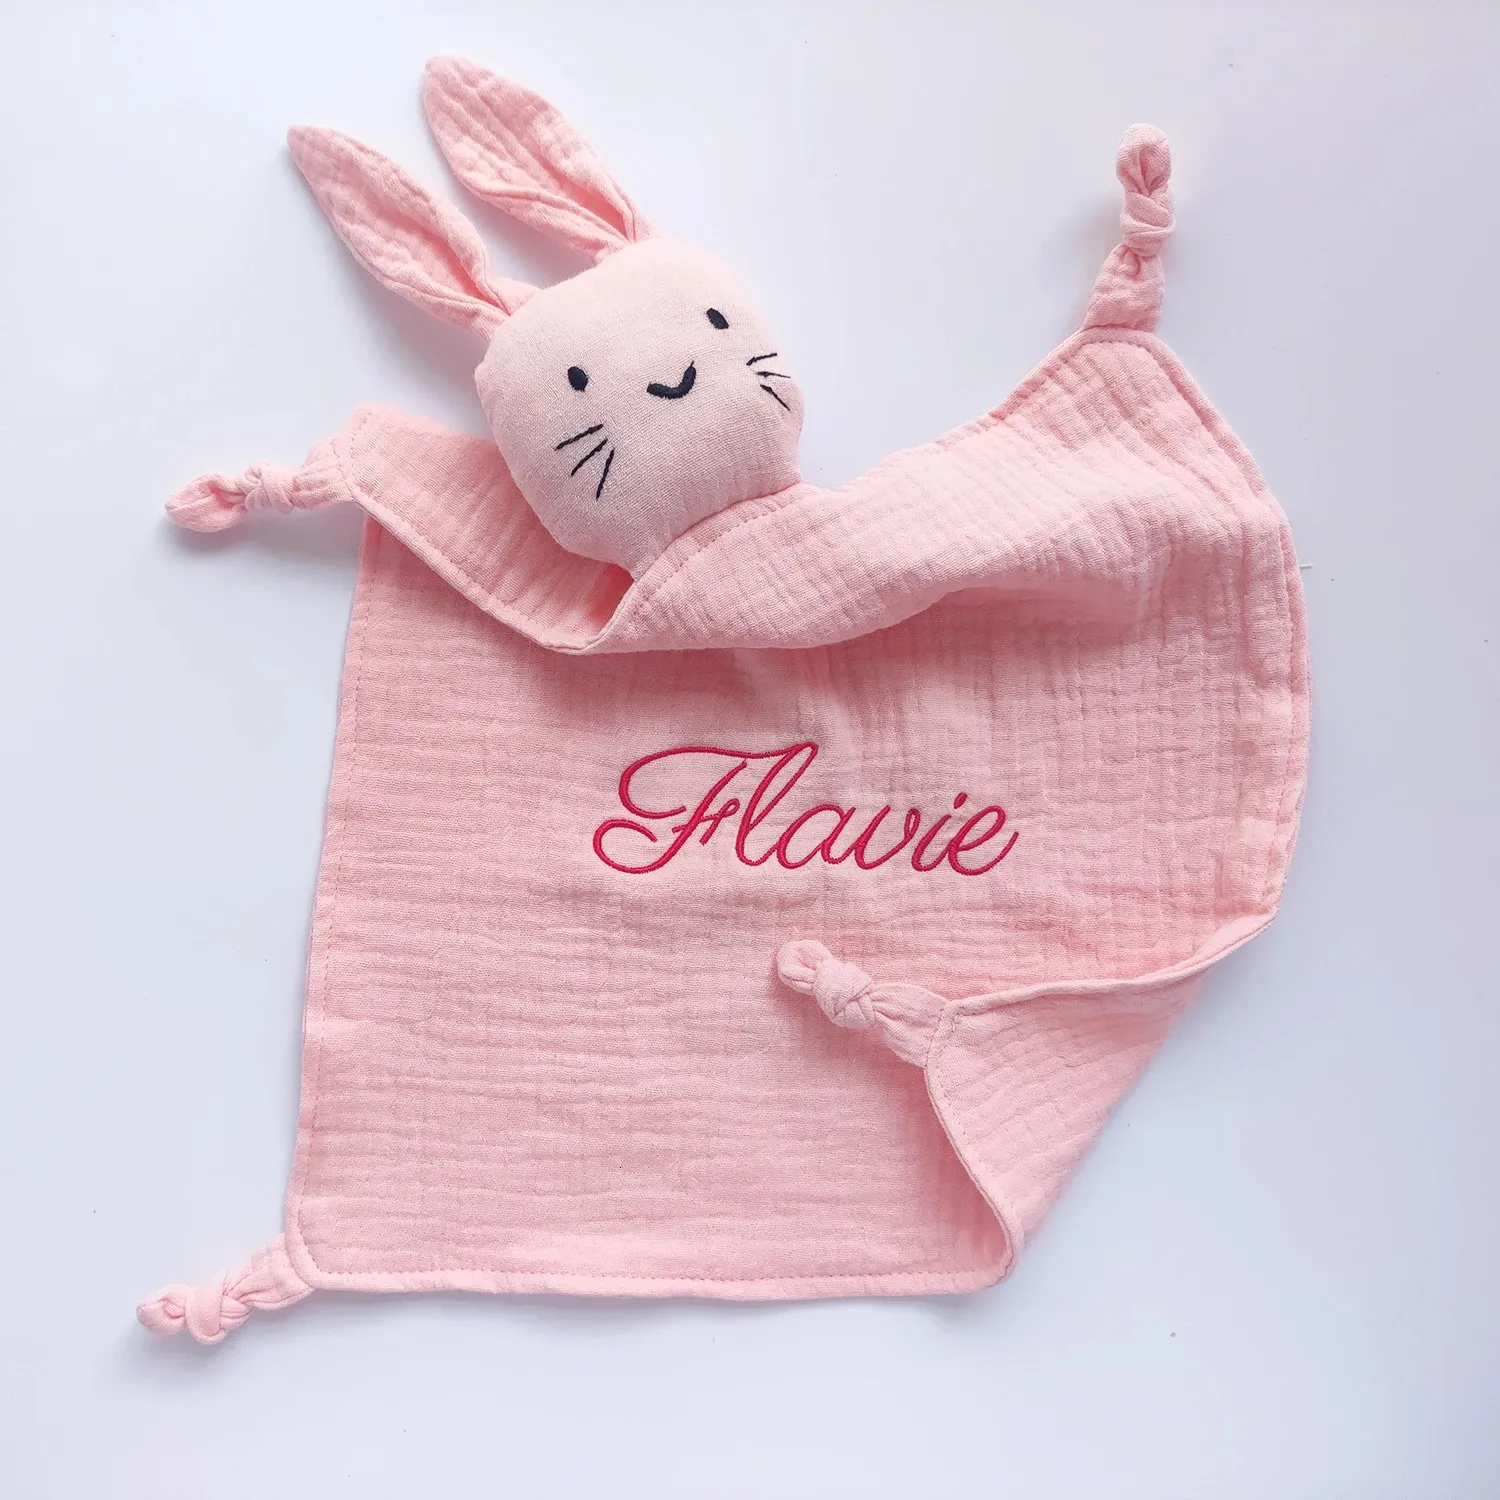 Blankets Swaddling Name Personalized Embroidered Baby Soother Appease Towel Sleeping Baby Comforter Security Blanket Gift For bron Baby born 231114